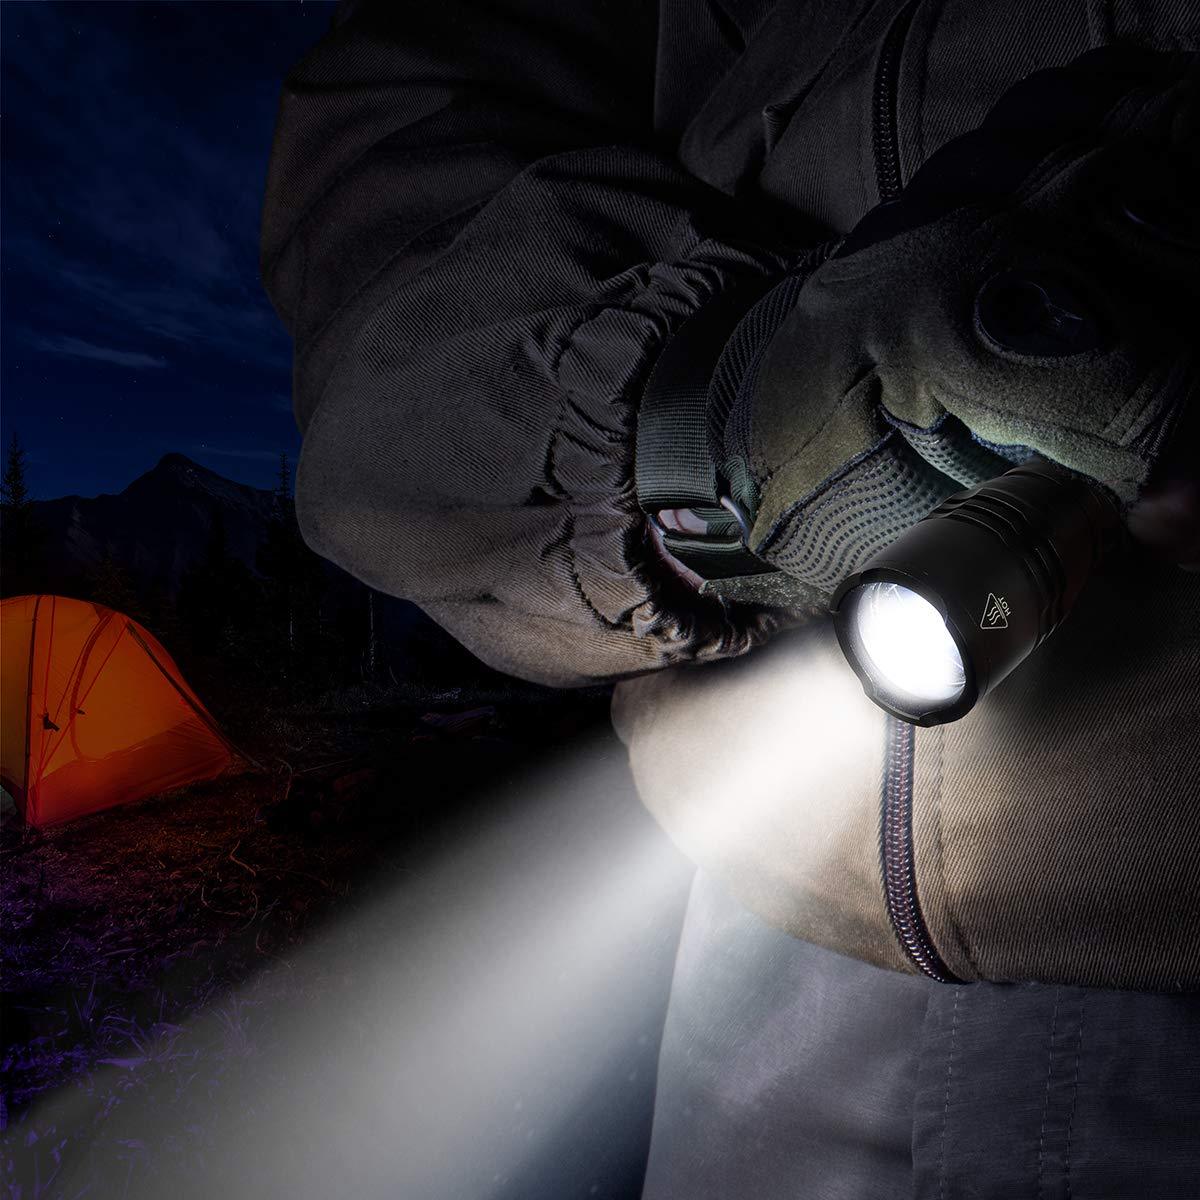 GearLight TAC LED Tactical Flashlight [2 PACK] - Single Mode, High Lumen, Zoomable, Water Resistant, Flash Light - Camping, Outdoor, Emergency, Everyday Flashlights with Clip - image 3 of 7